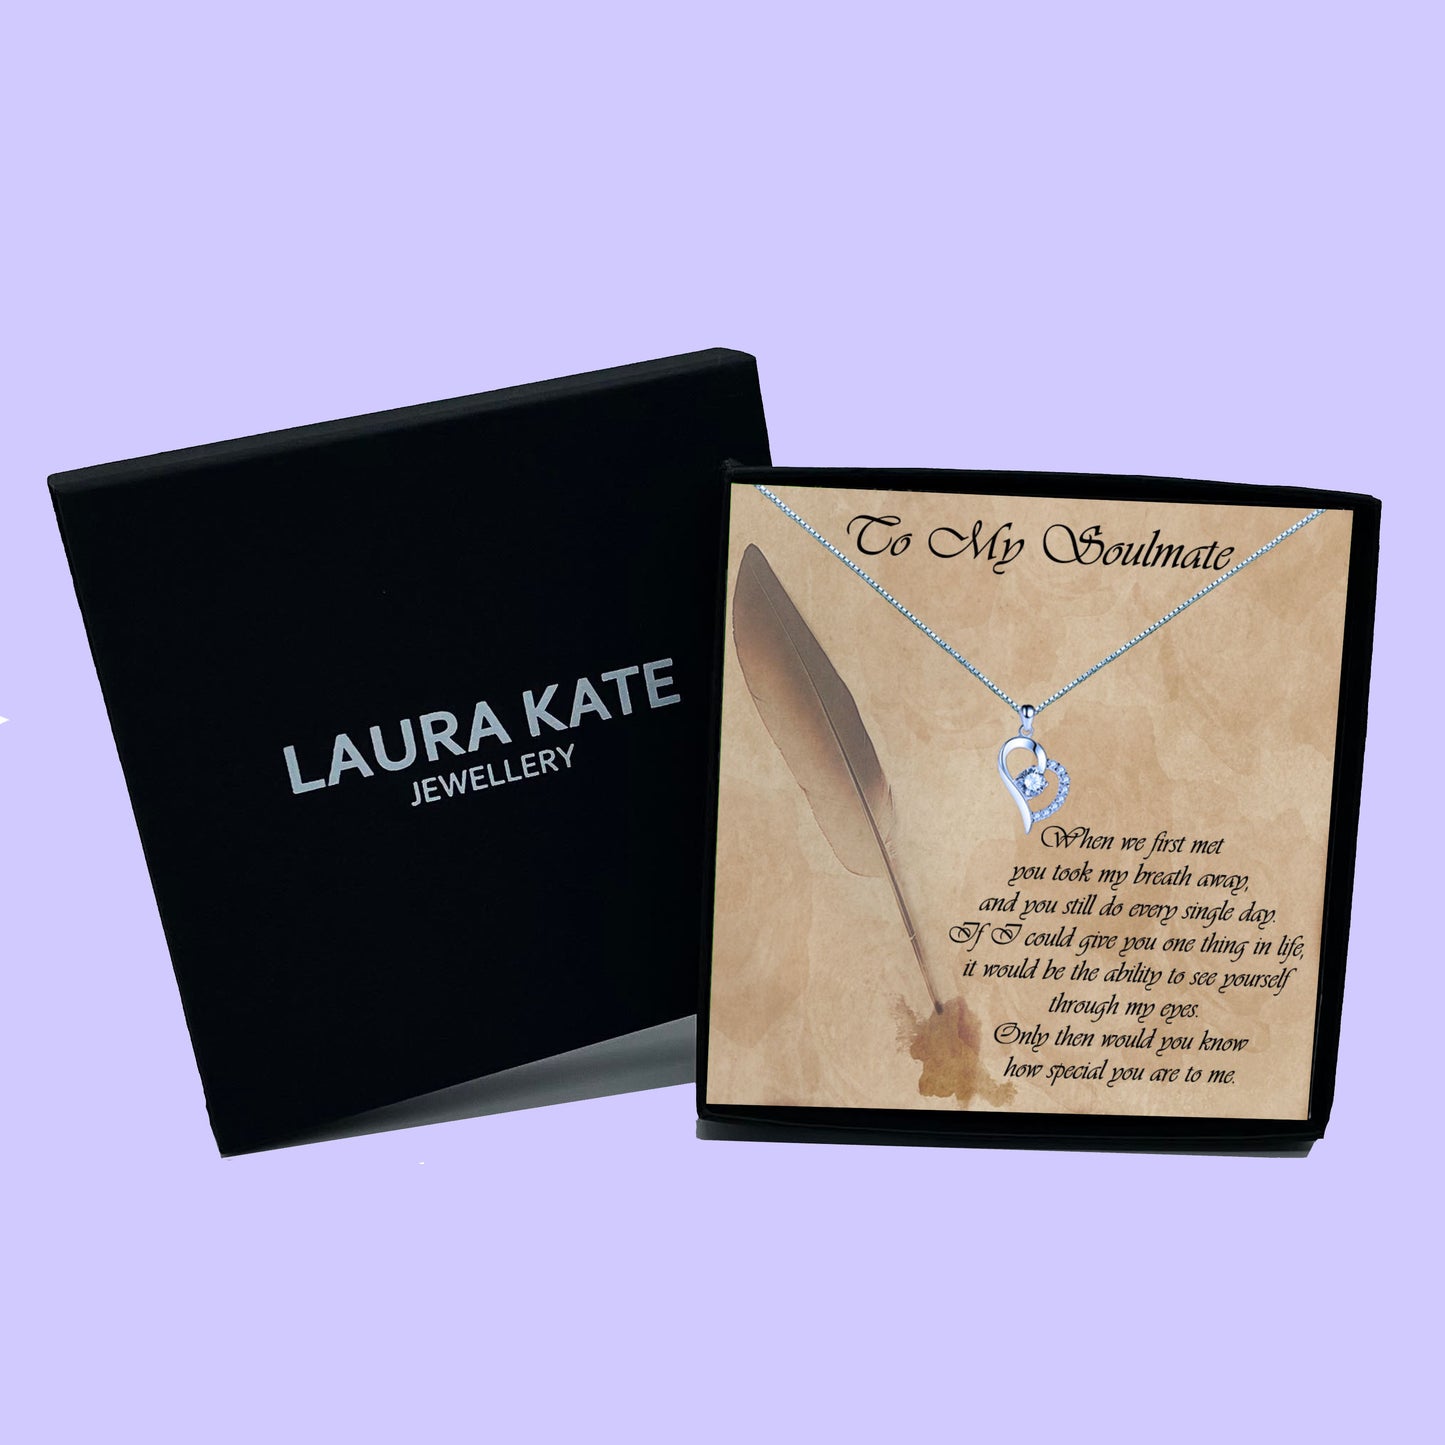 To My Soulmate - Quill Letter Message Necklace